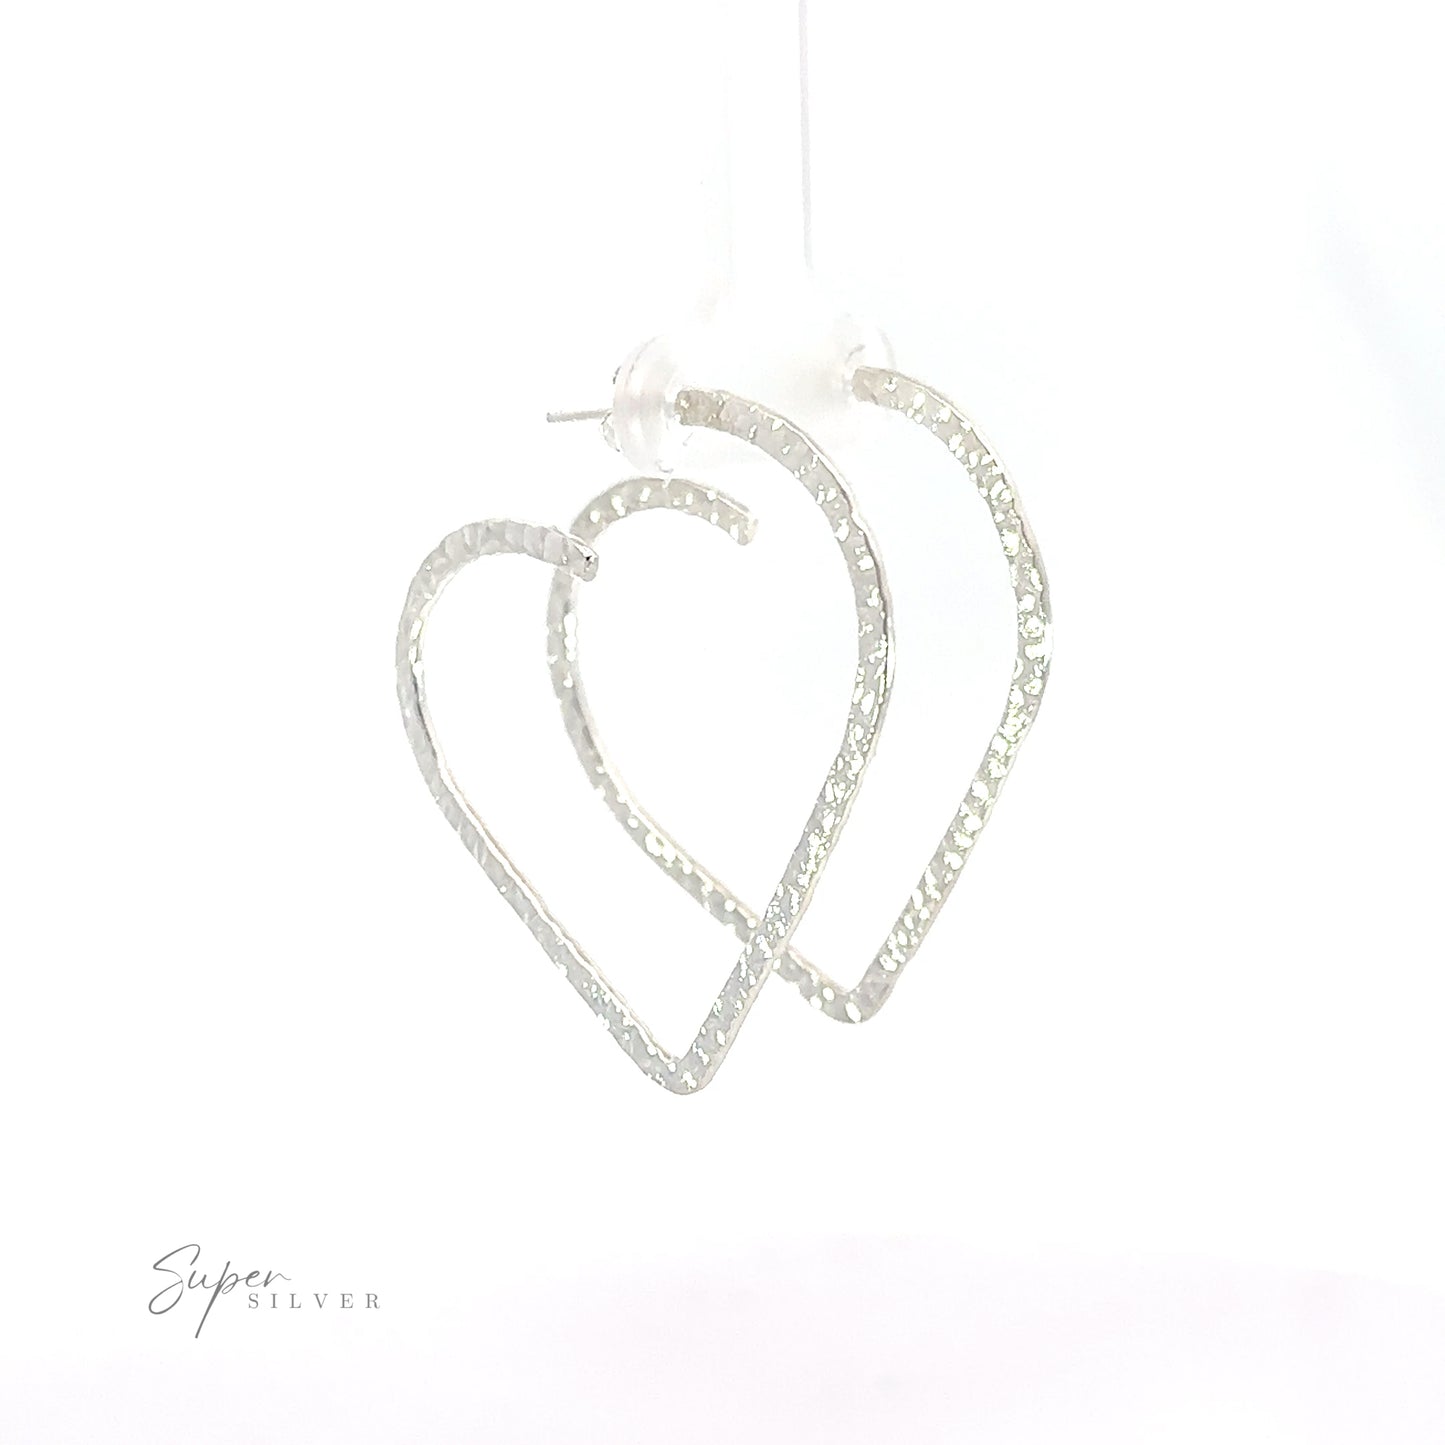 Two silver Textured Heart Hoop Earrings hanging on a white background.